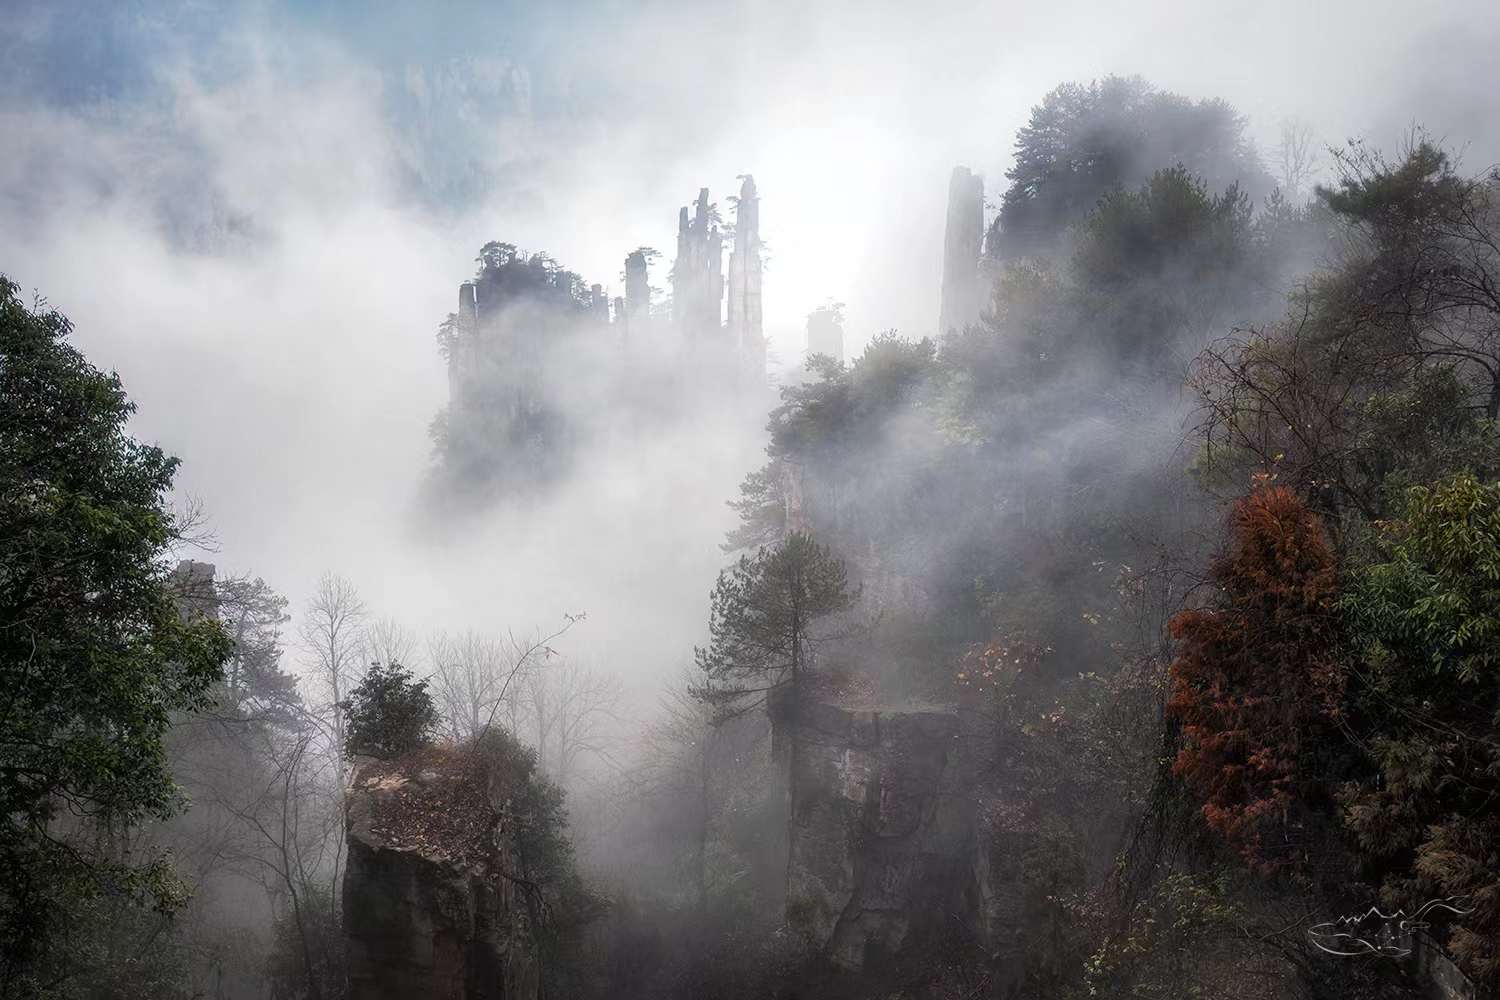 Day 3: Peripheral creation in Zhangjiajie all day